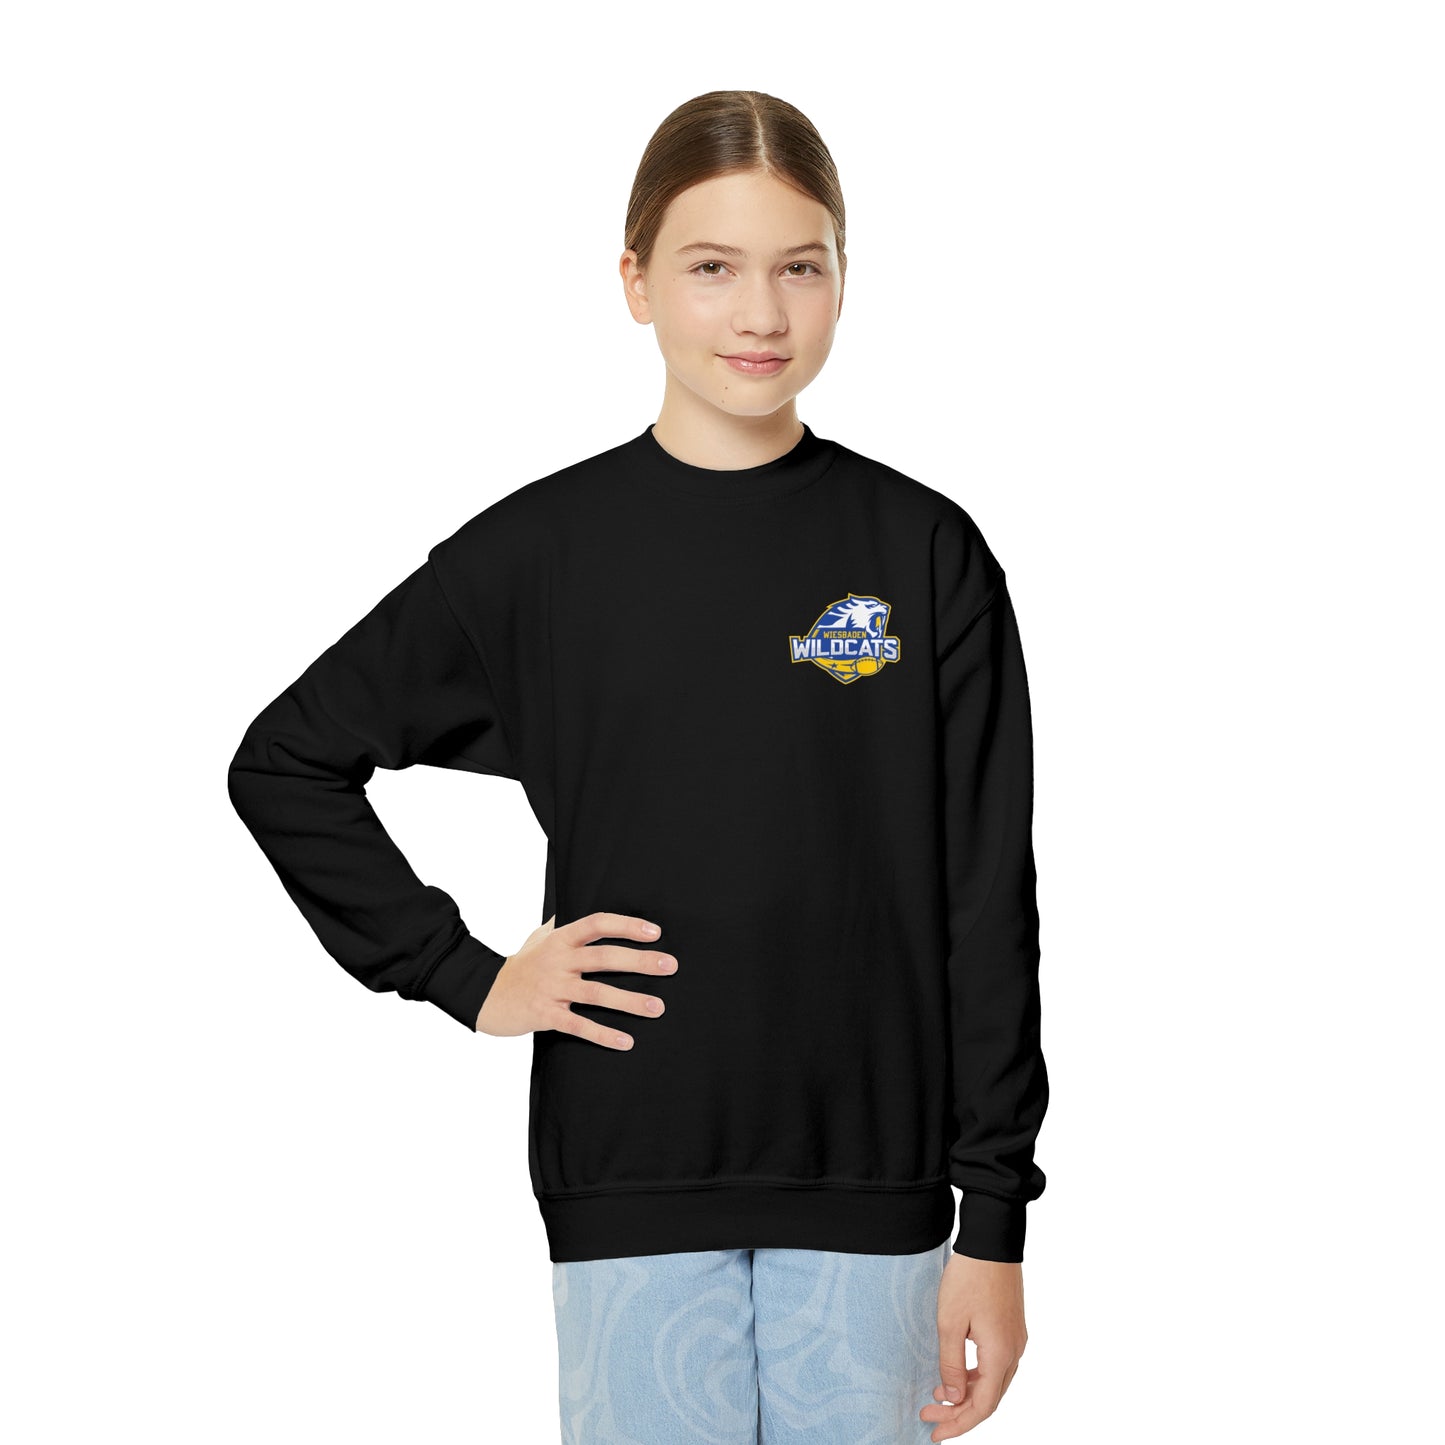 Wildcats (Front and Back) - Youth Crewneck Sweatshirt